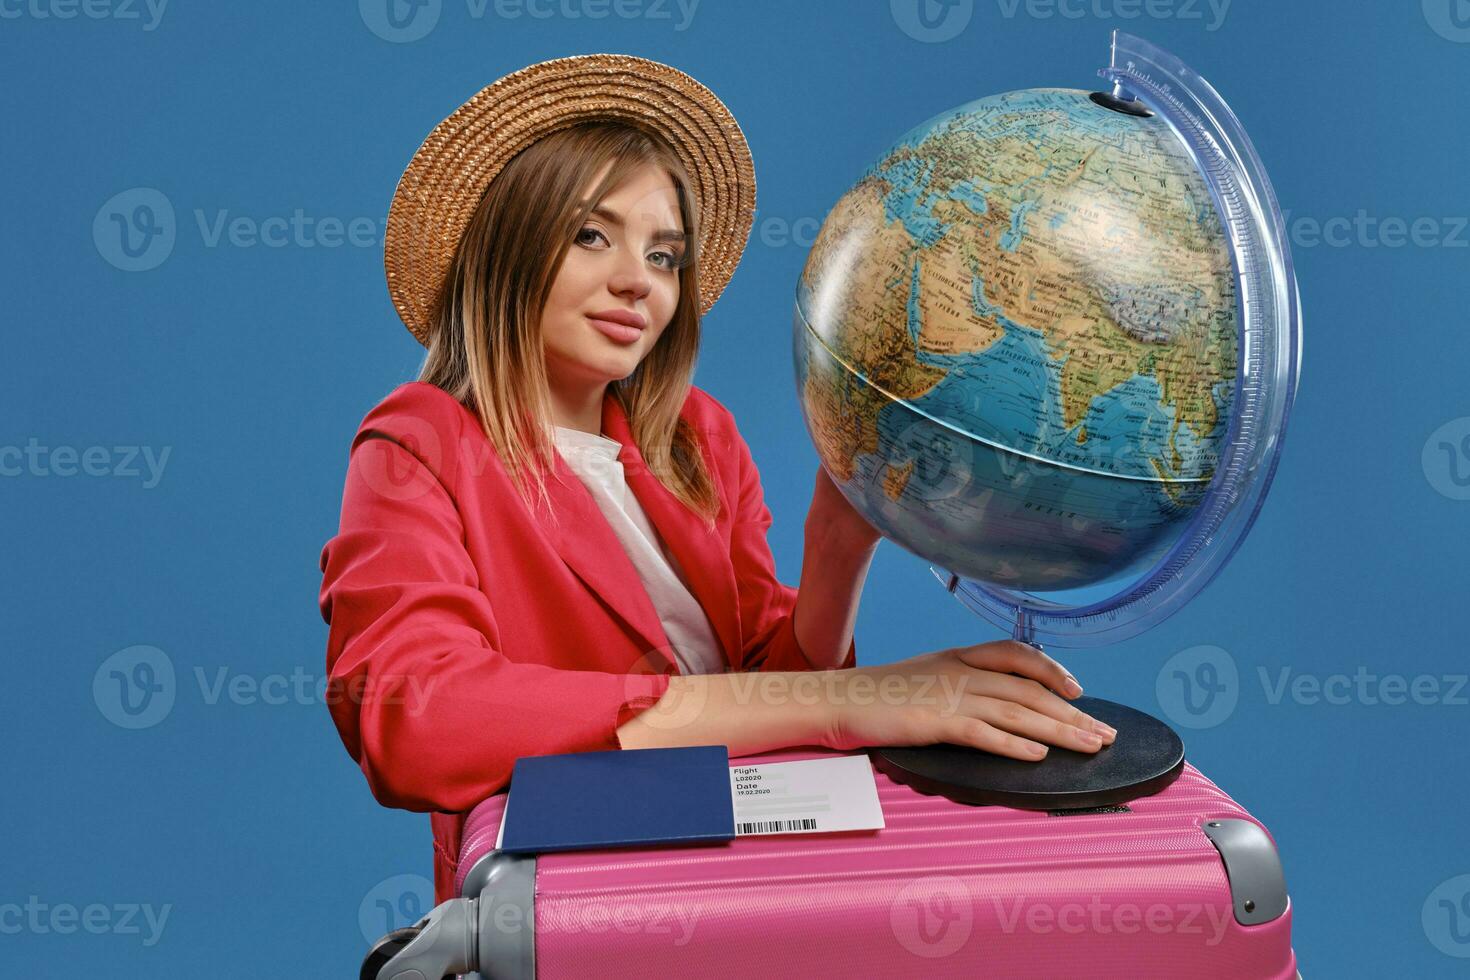 Blonde girl in straw hat, white blouse, red jacket. Holding globe standing on pink suitcase, passport and ticket nearby, posing on blue background photo